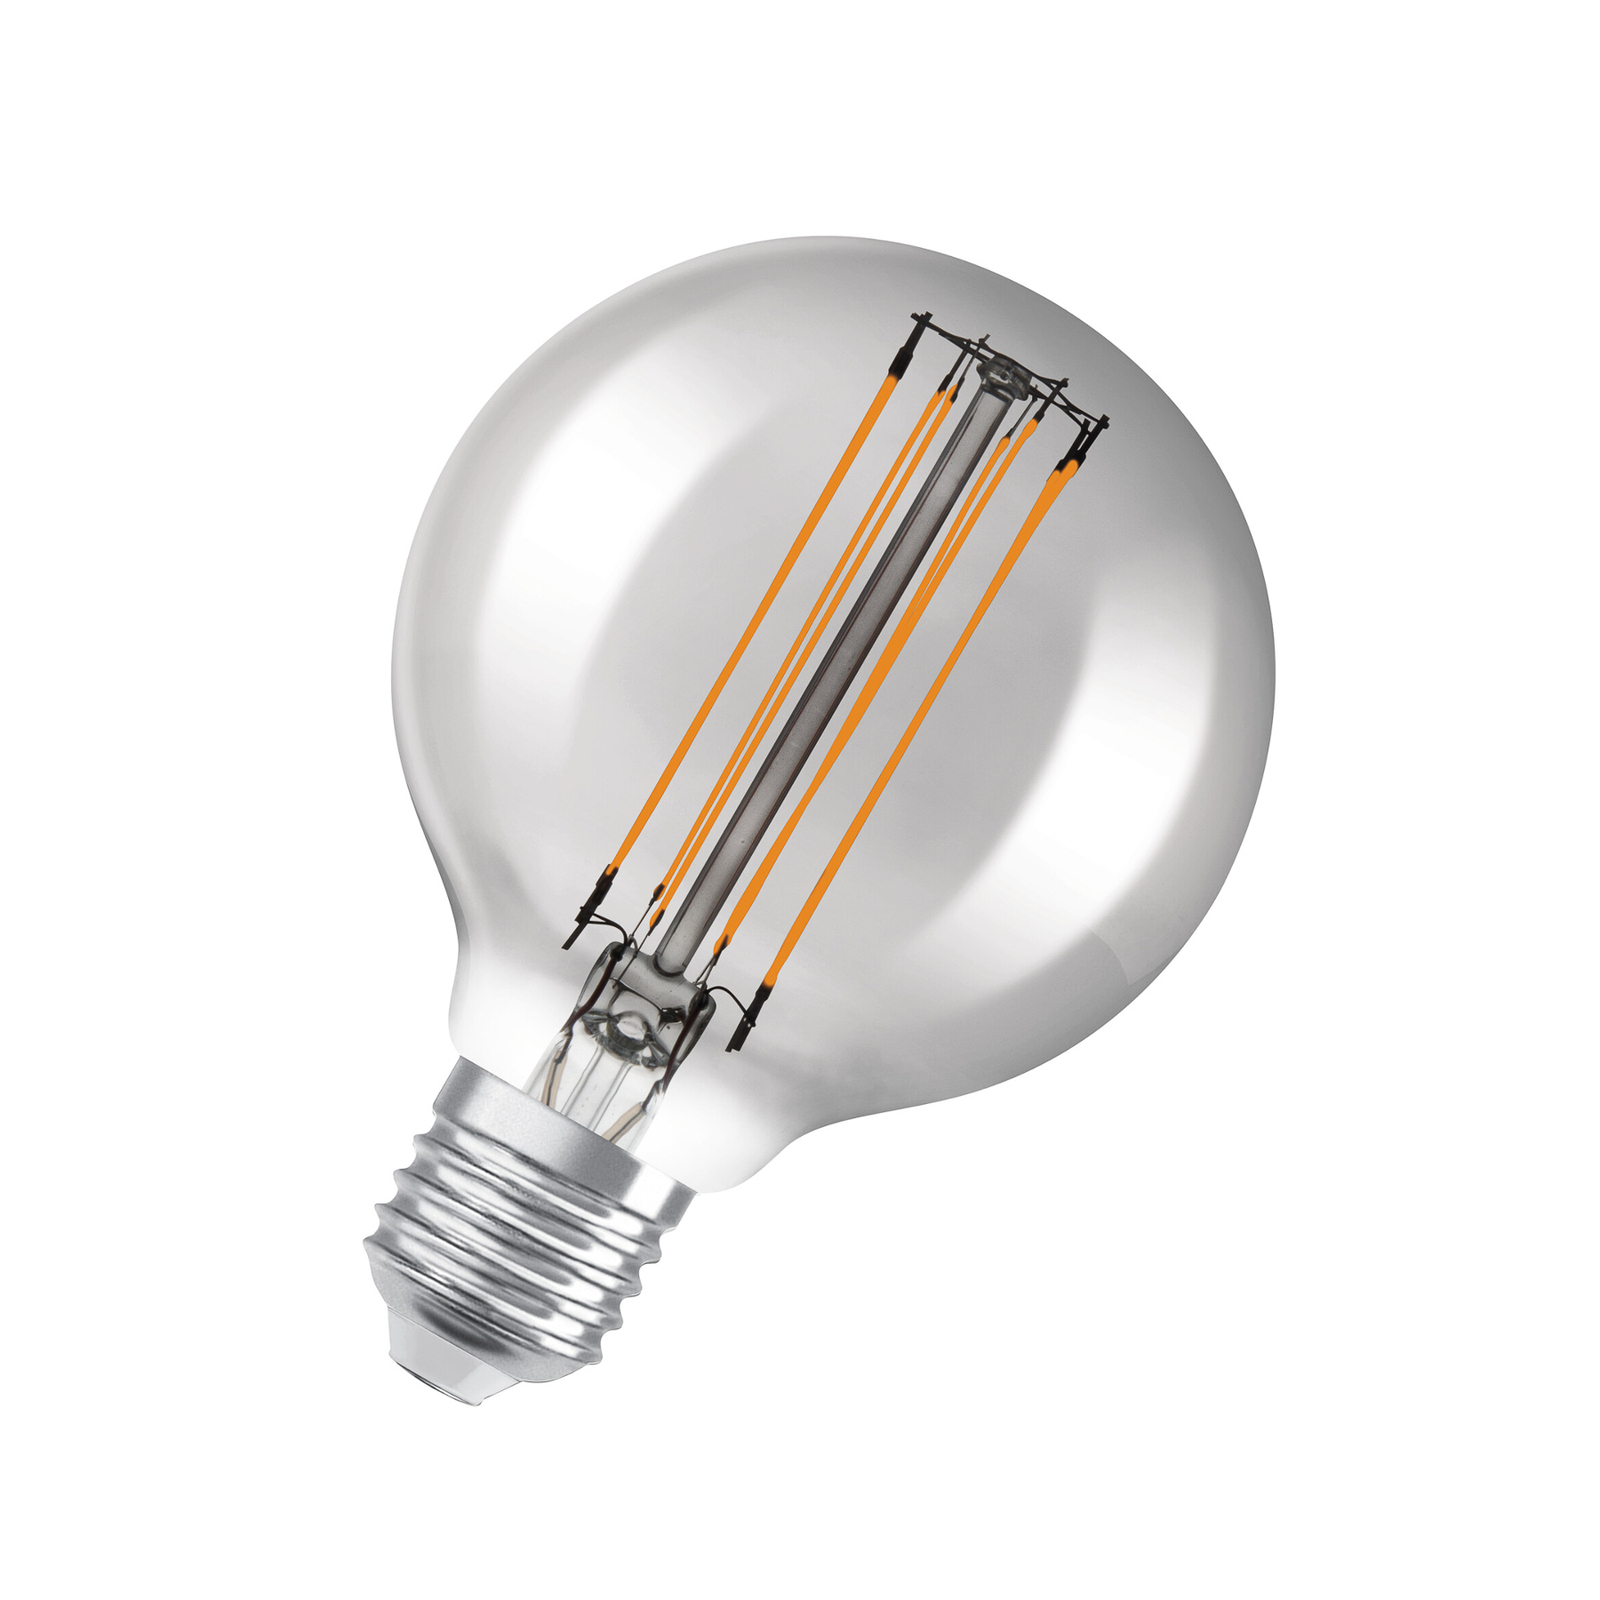 OSRAM LED Vintage 1906, G80, E27, 11 W, grey, 1,800 K, dimmable.